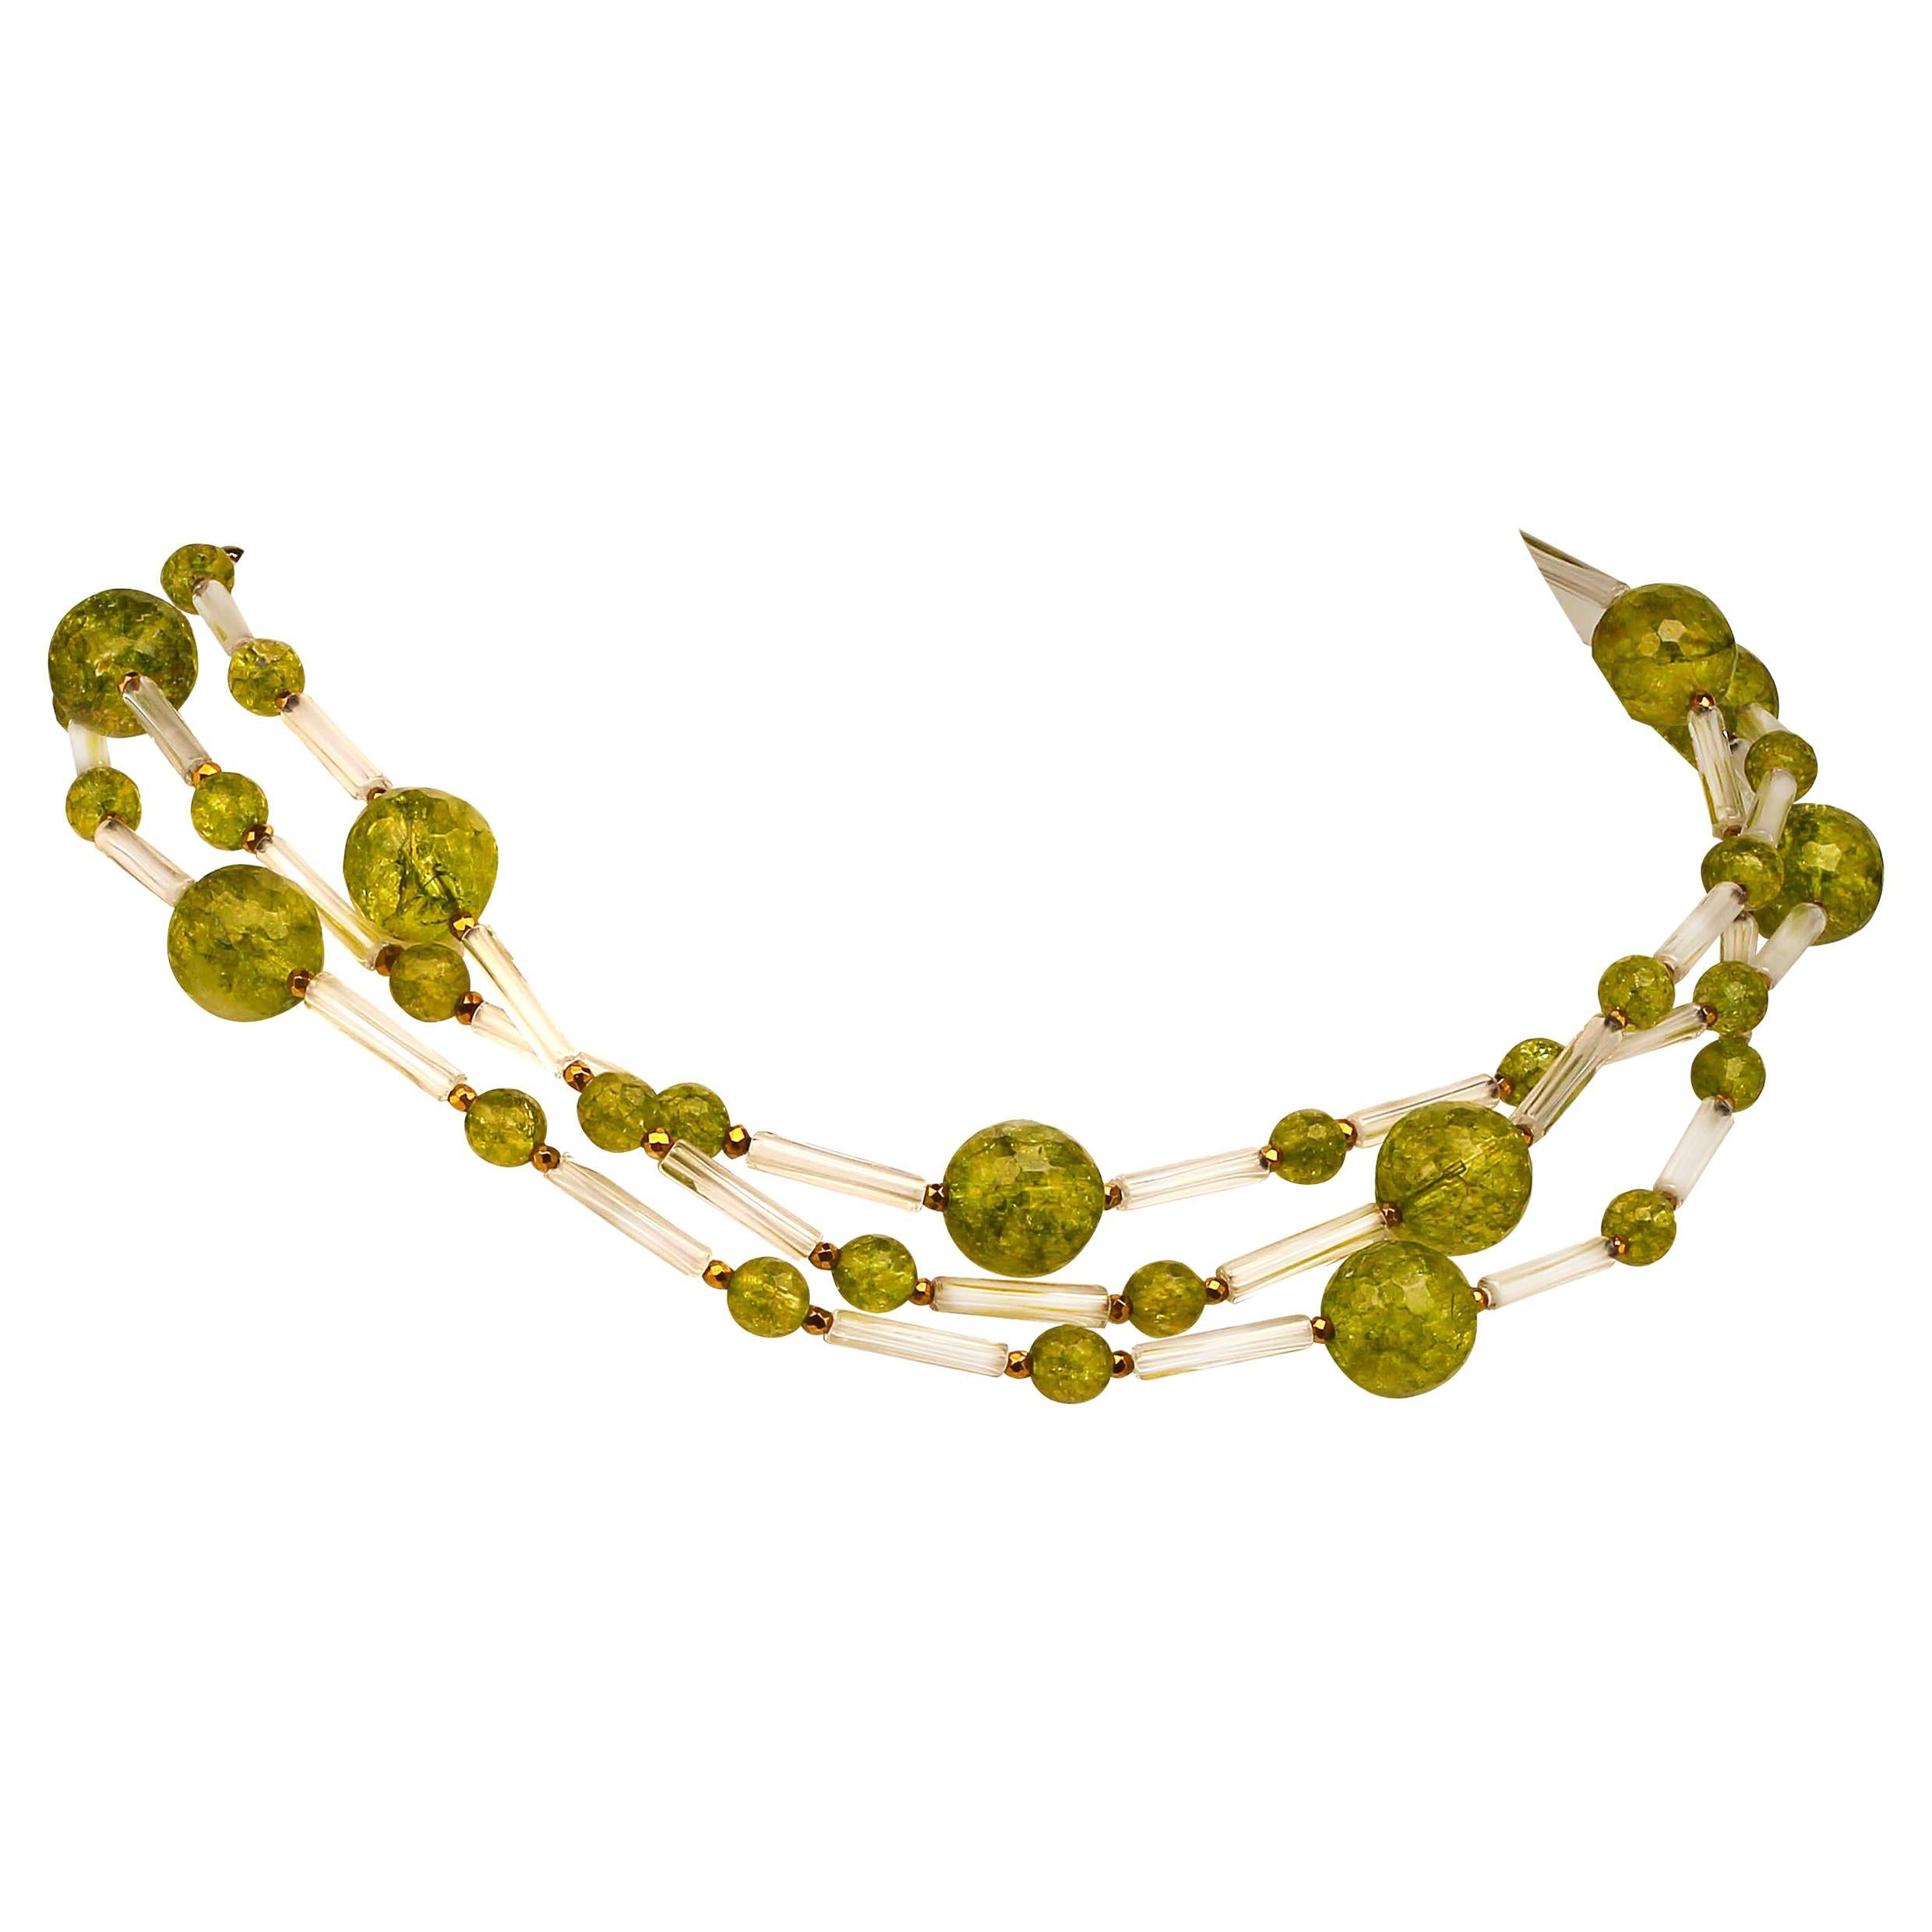 Unique, handmade necklace of Peridot and Crystal tubes.  The faceted Peridot are 12MM and 6MM accented with faceted pyrite and spaced with fine 15MM Crystal tubes which allow the Peridot to be the focal point of the necklace.  This three stand